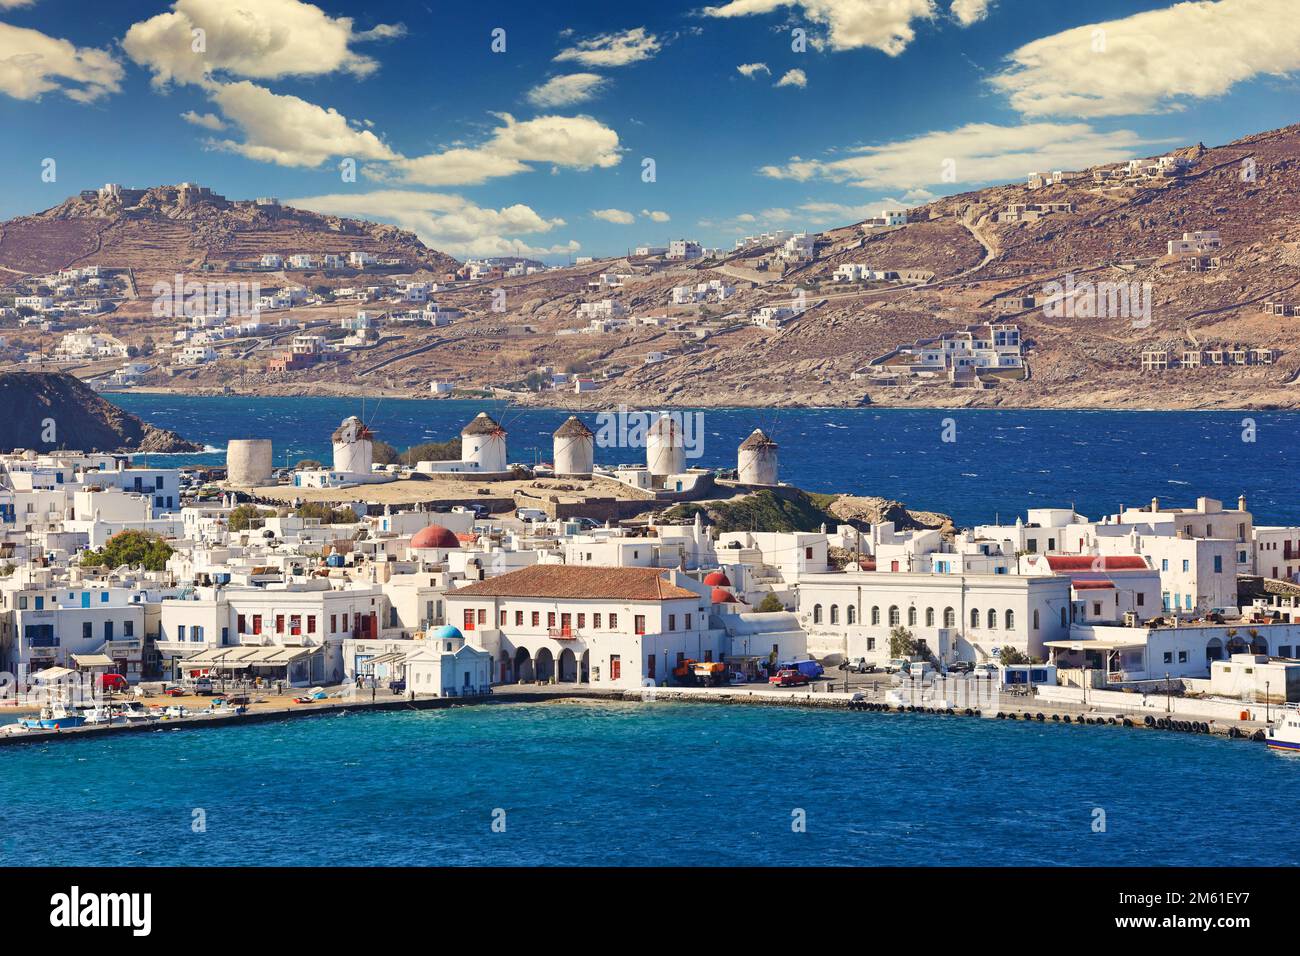 The famous windmills and the port of Mykonos island, Greece Stock Photo